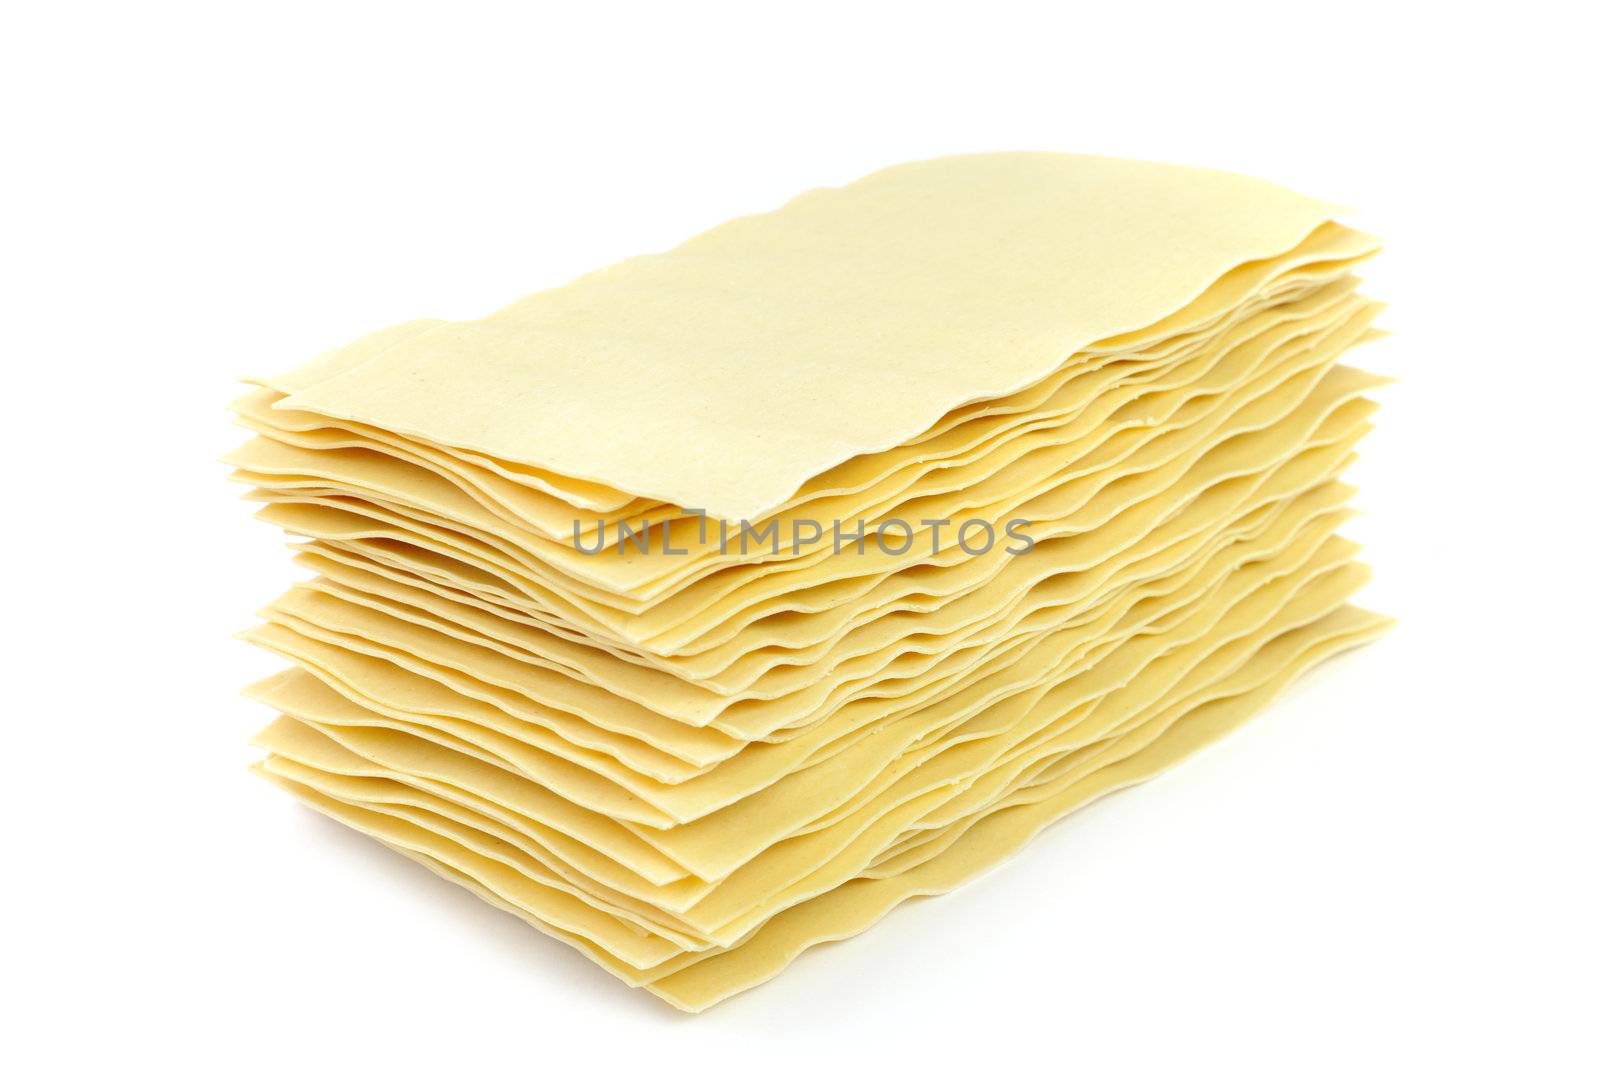 An image of raw lasagna on white background